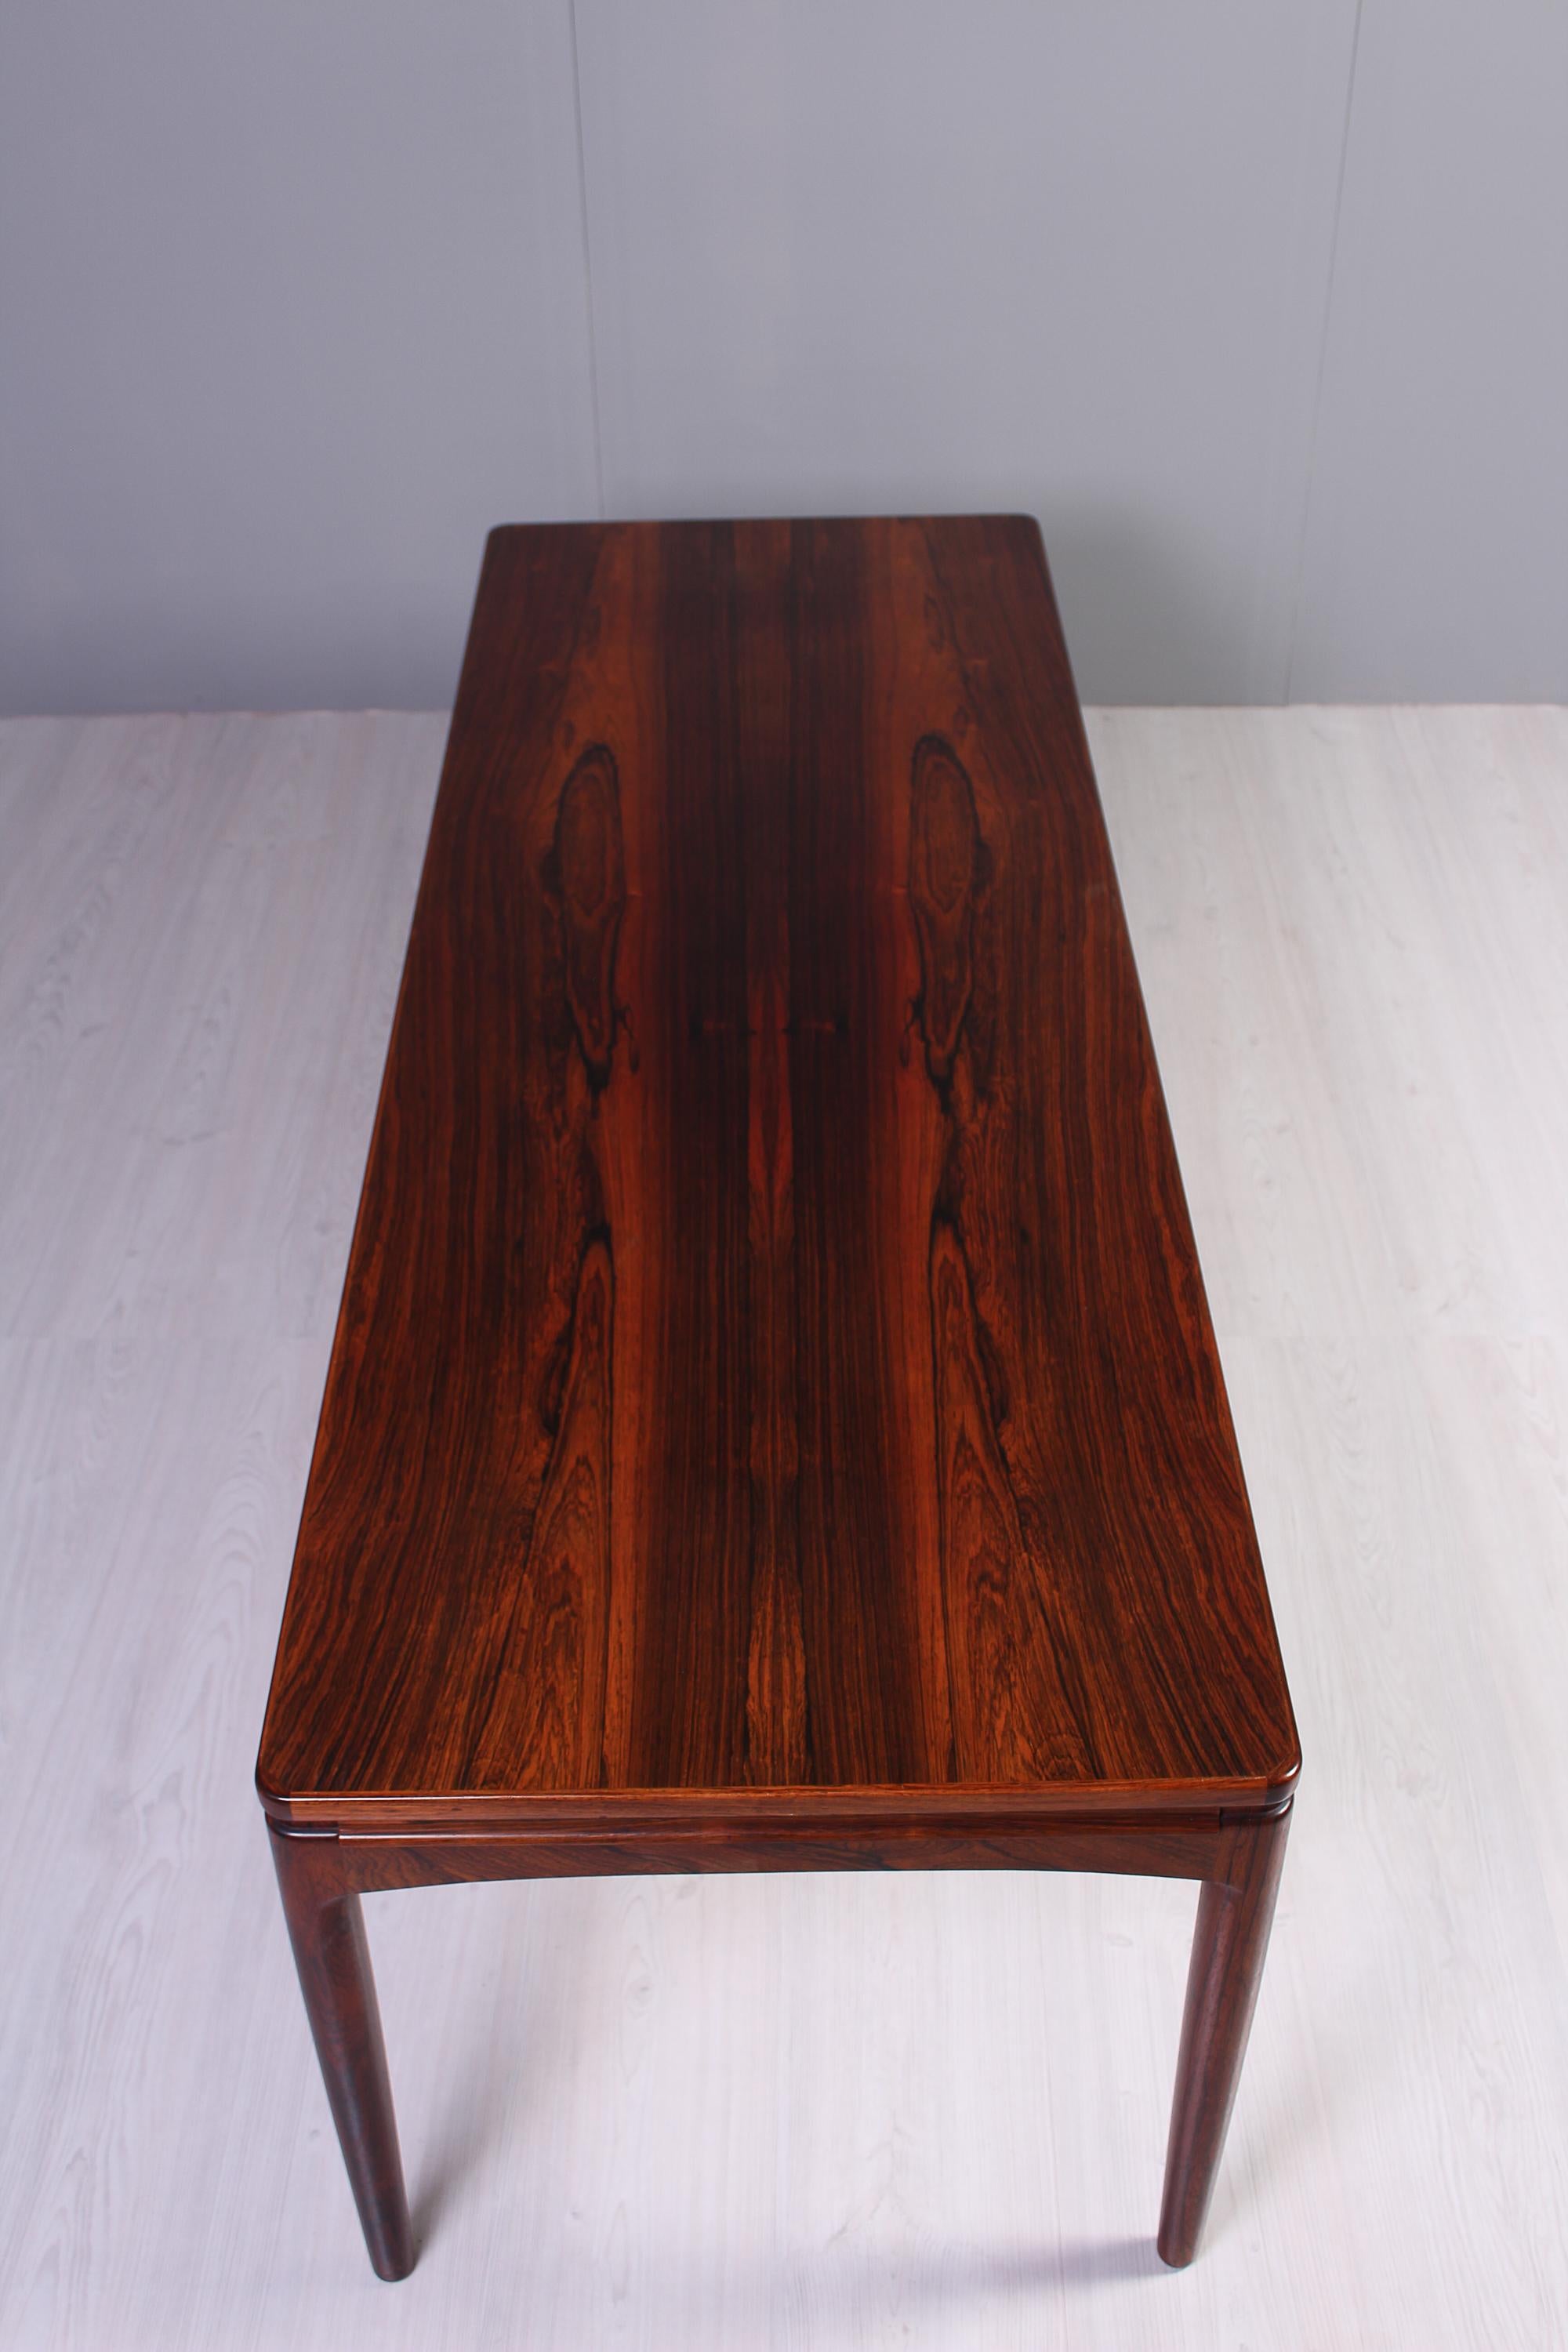 Midcentury Scandinavian Rosewood Coffee Table, 1950s In Good Condition For Sale In Malmo, SE